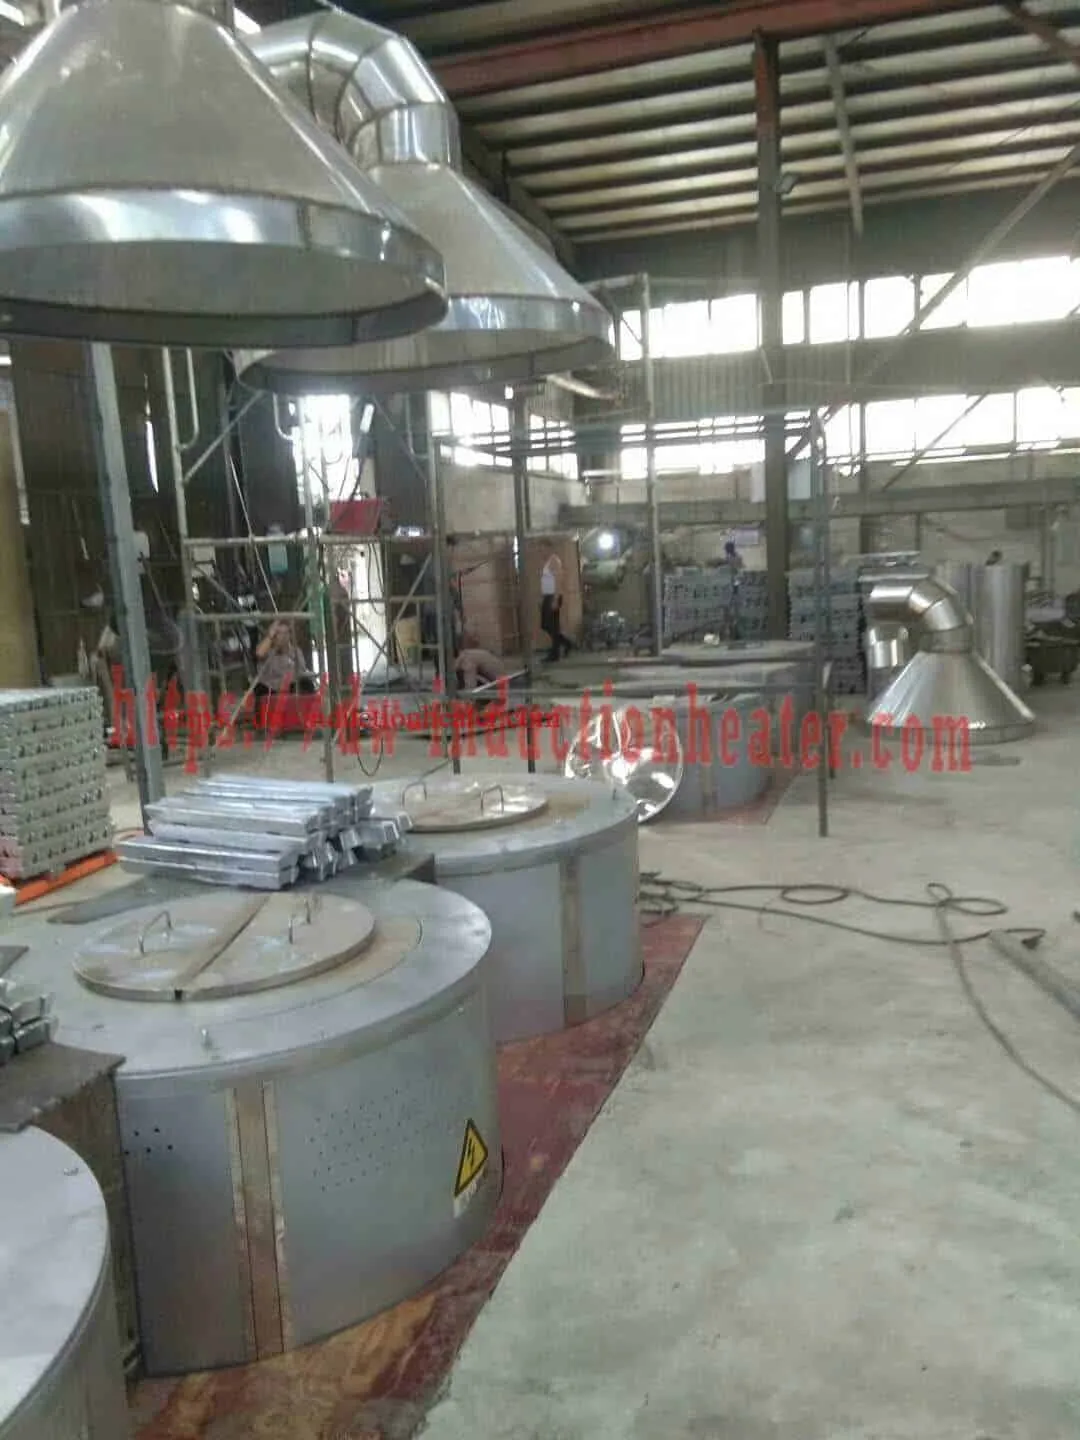 soap melting machine, soap melting machine Suppliers and Manufacturers at